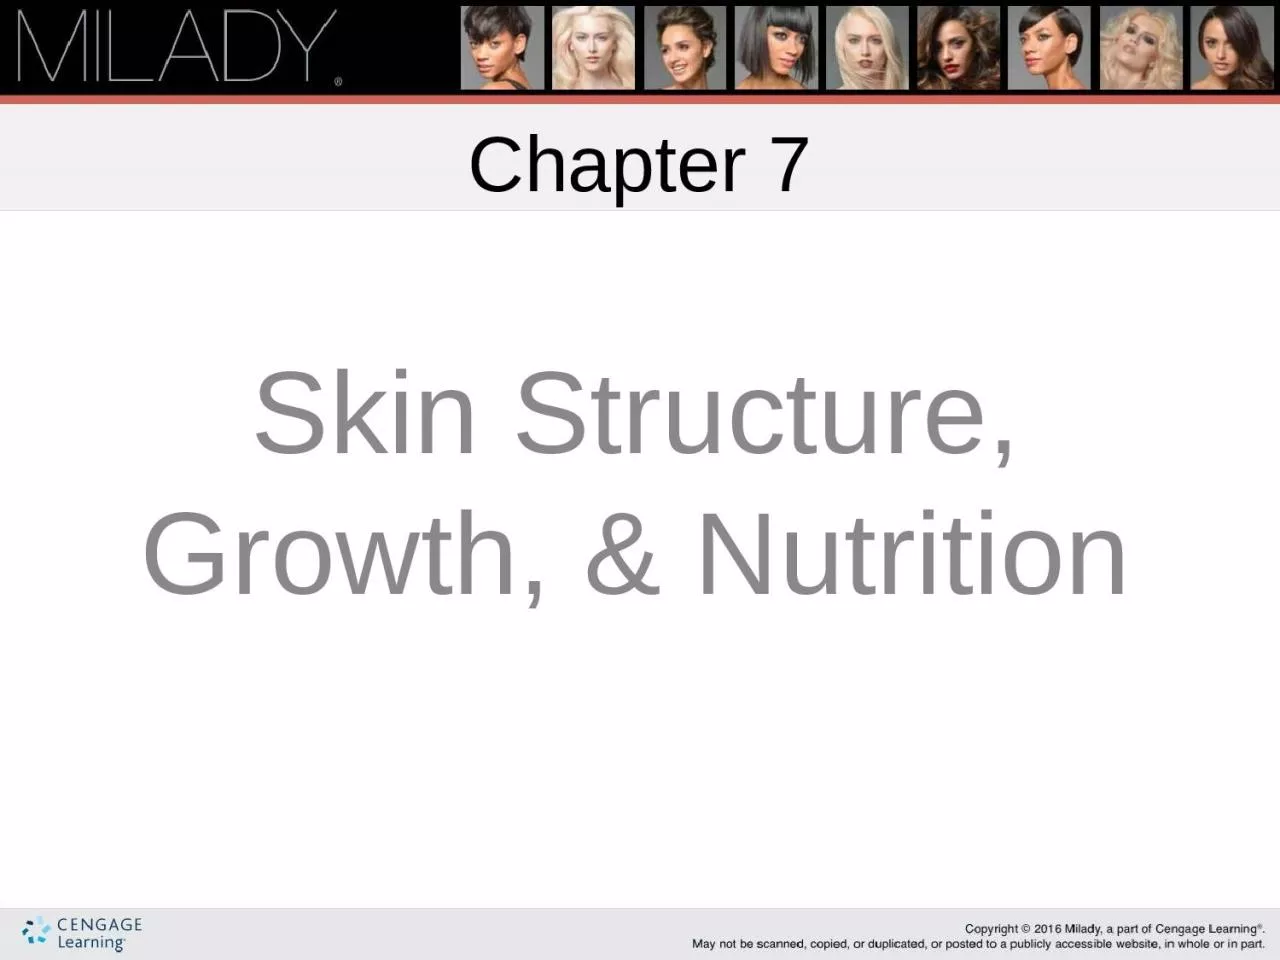 Chapter 7 Skin Structure, Growth, & Nutrition